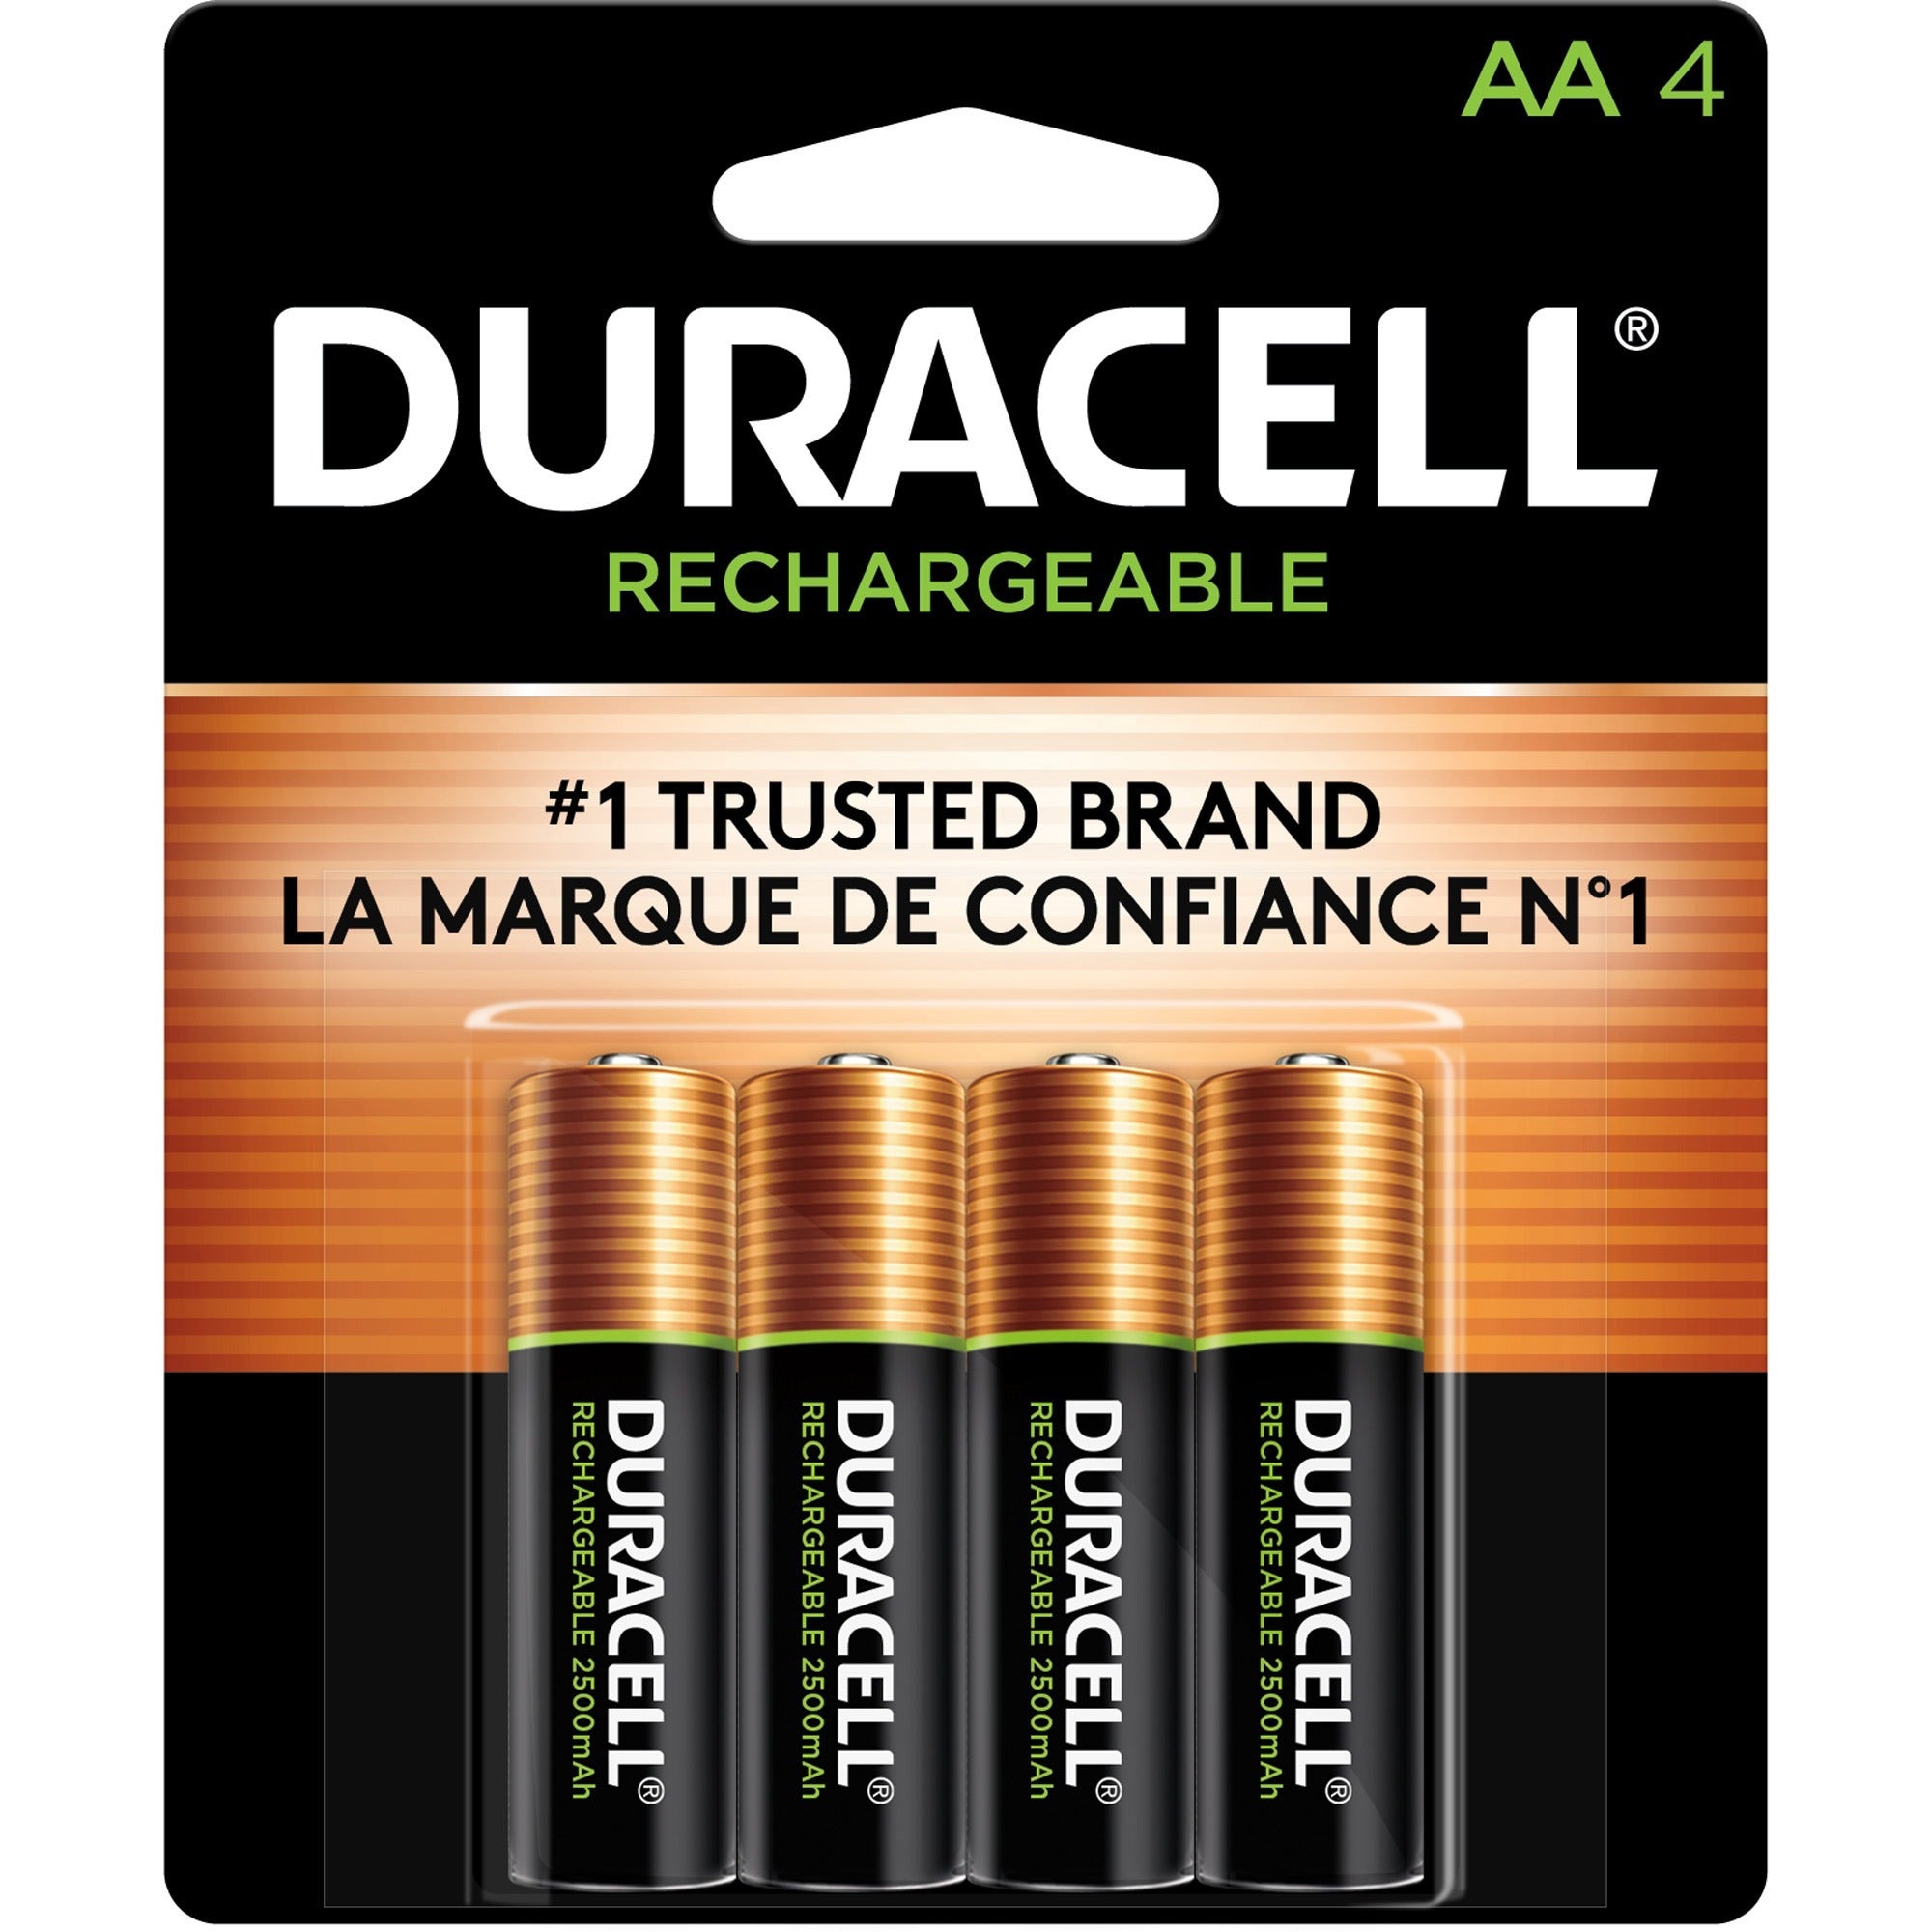 duracell-staycharged-aa-rechargeable-battery-4-packs-for-general-purpose-gaming-controller-flashlight-monitoring-device-battery-rechargeable-aa-24-carton_durnlaa4bcdct - 1